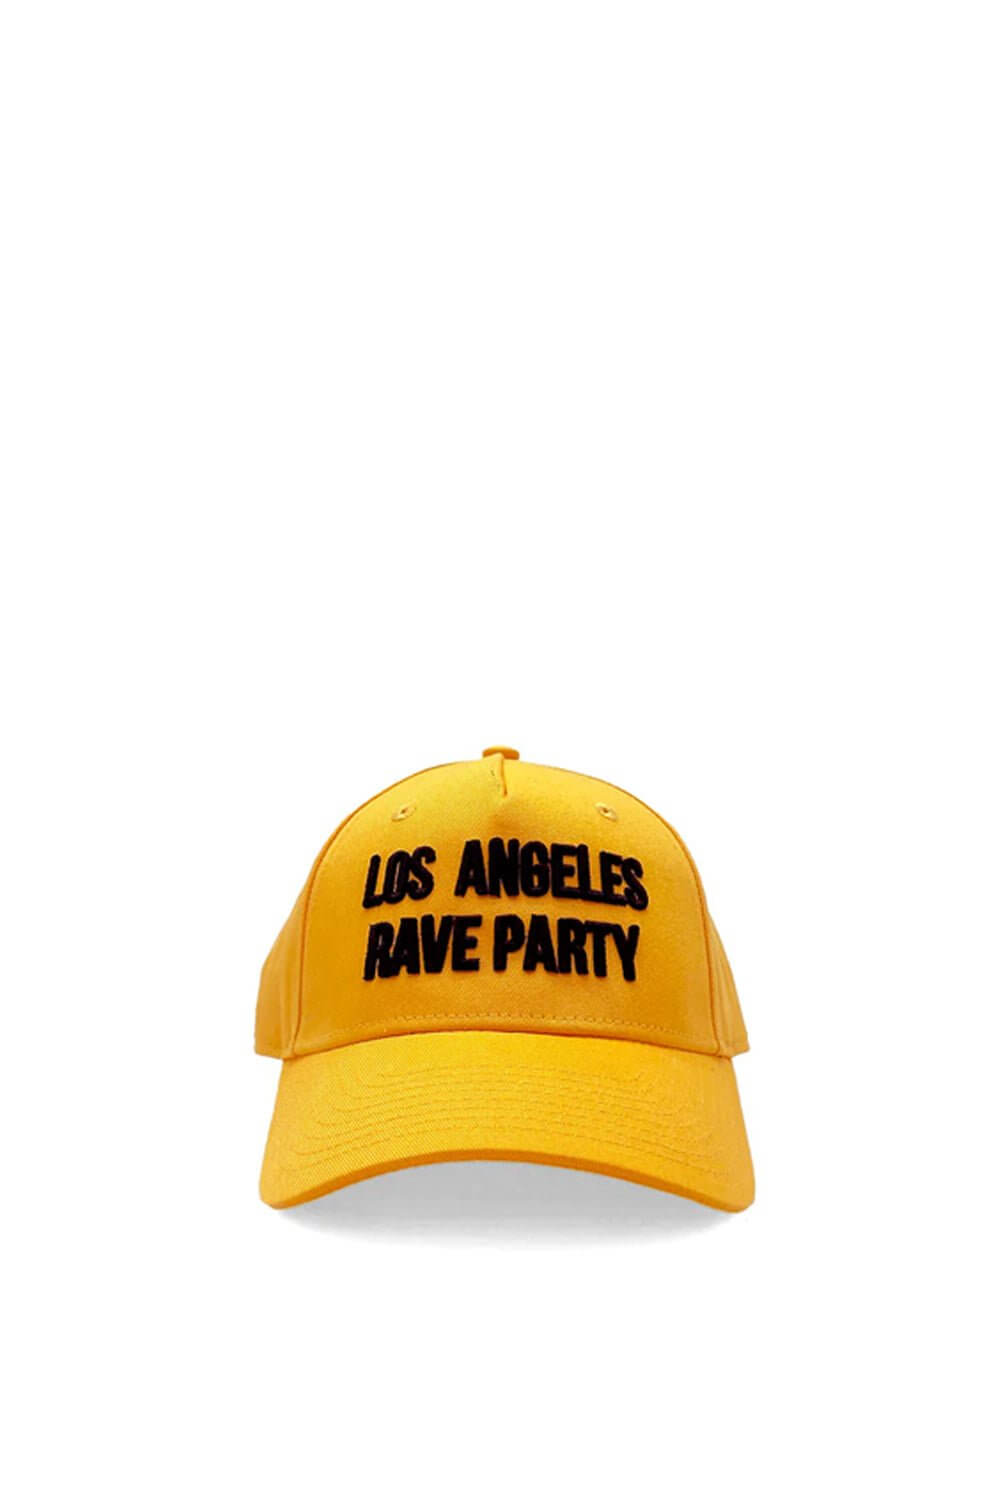 HTC RAVE BASEBALL CAP Baseball cap with preformed peak, round crown with eyelets, Los Angeles Rave party patch embroidered on the front, adjustable strap on the back. One size fits all. 100% cotton. HTC LOS ANGELES